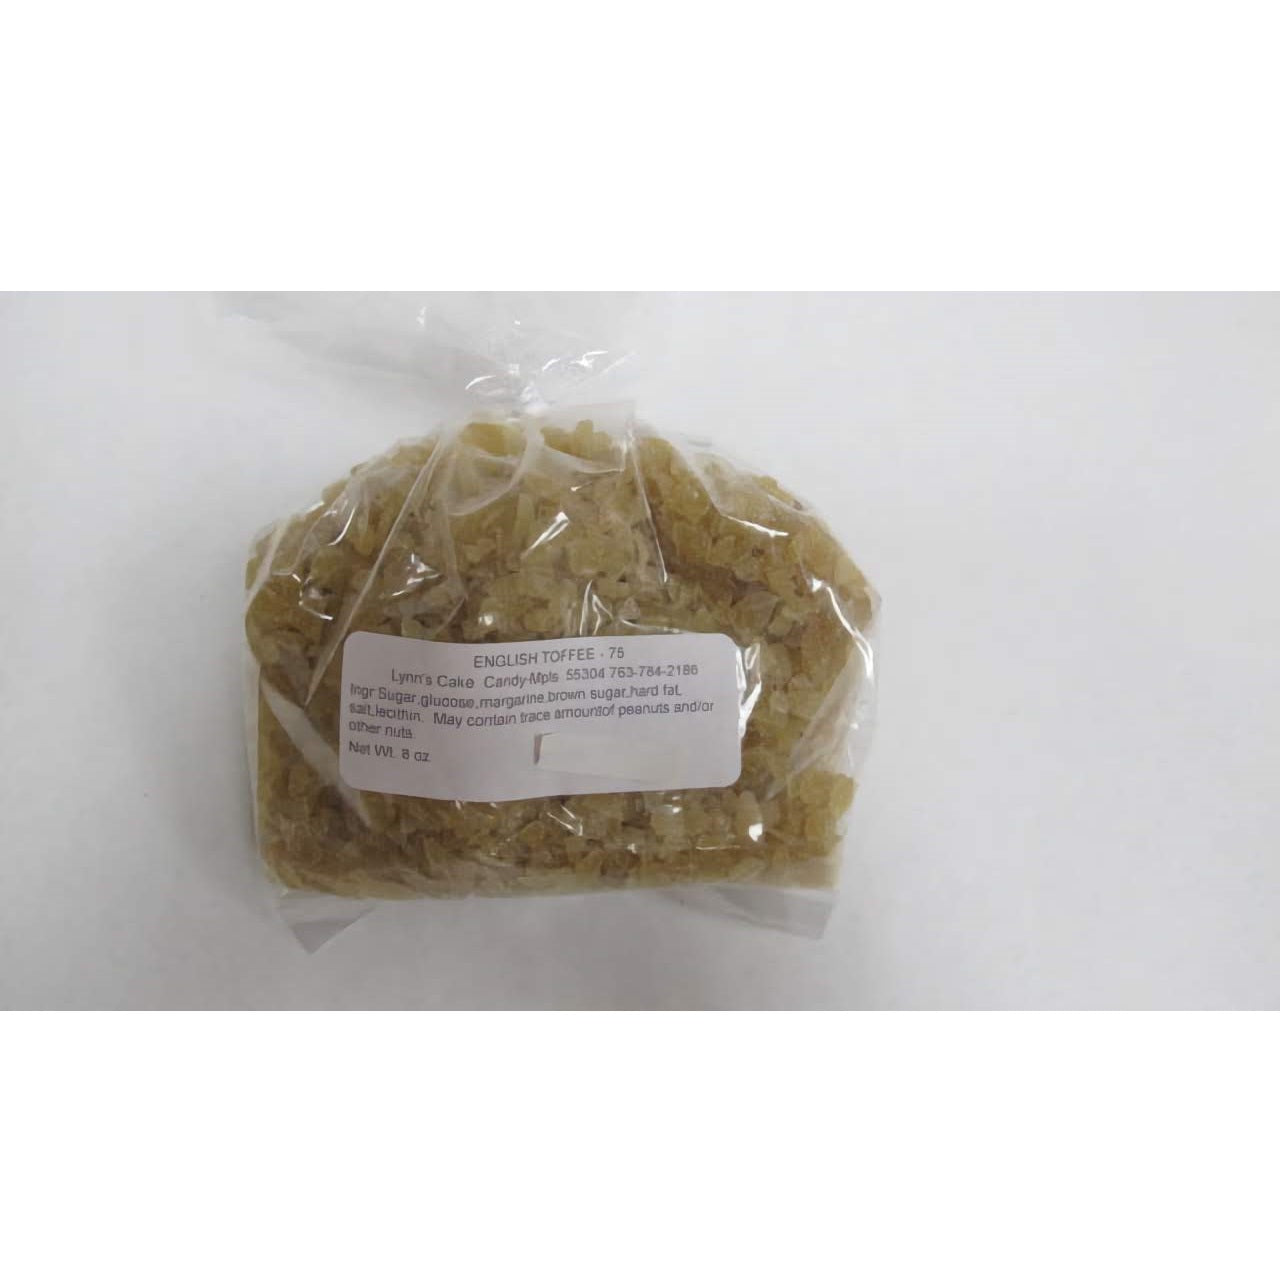 A Bag of English Toffee Candy Crunch for Candy Making